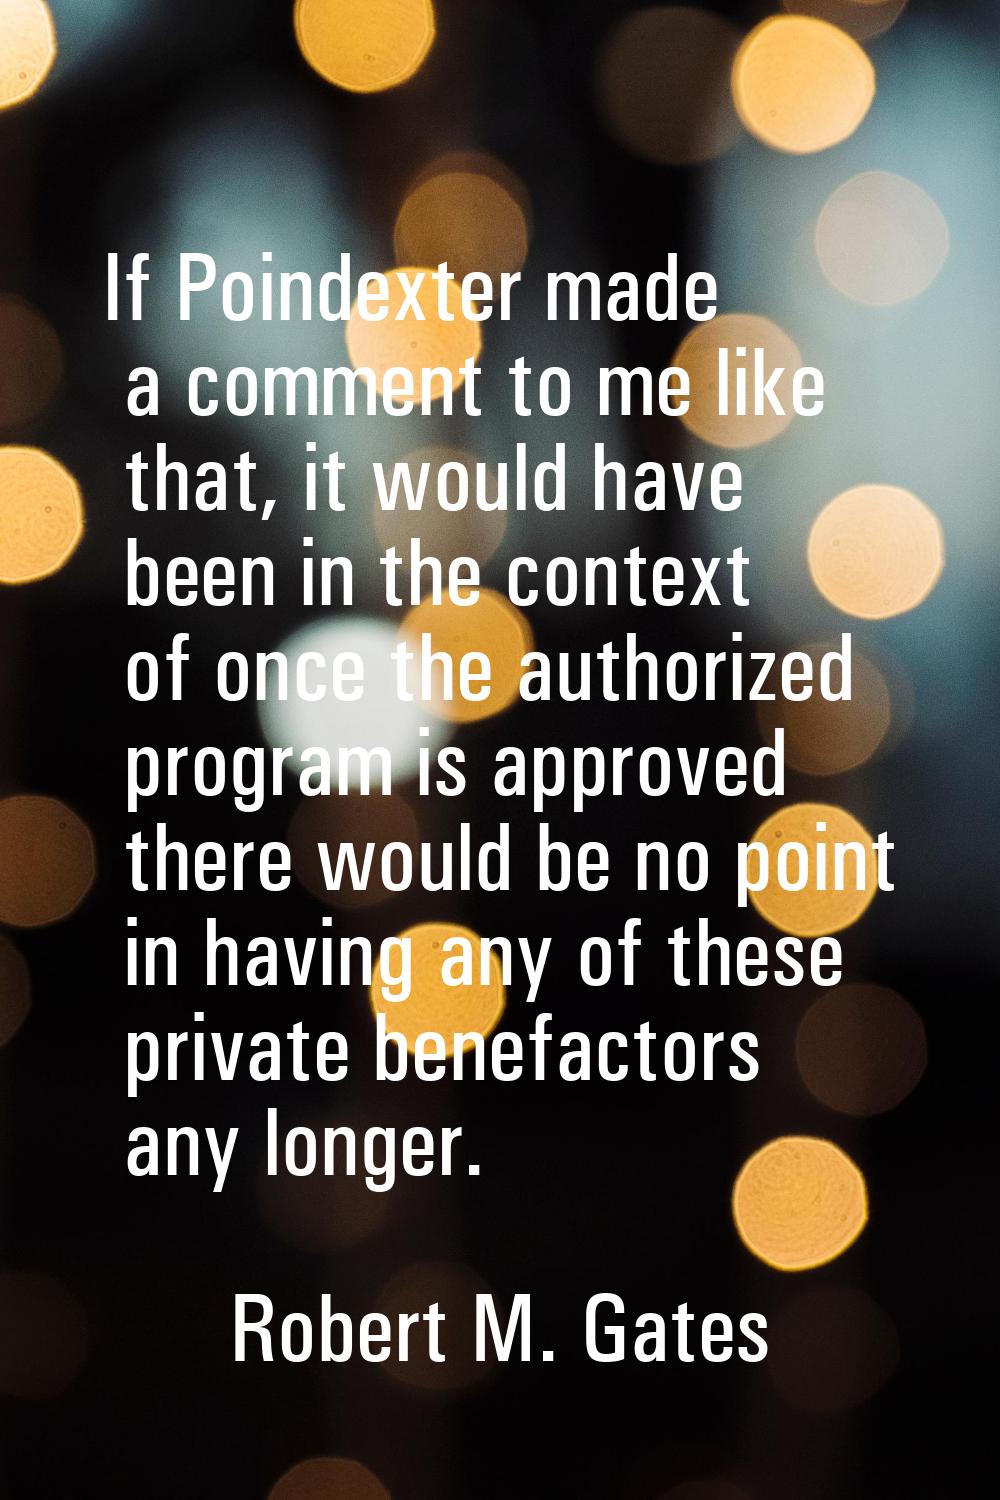 If Poindexter made a comment to me like that, it would have been in the context of once the authori